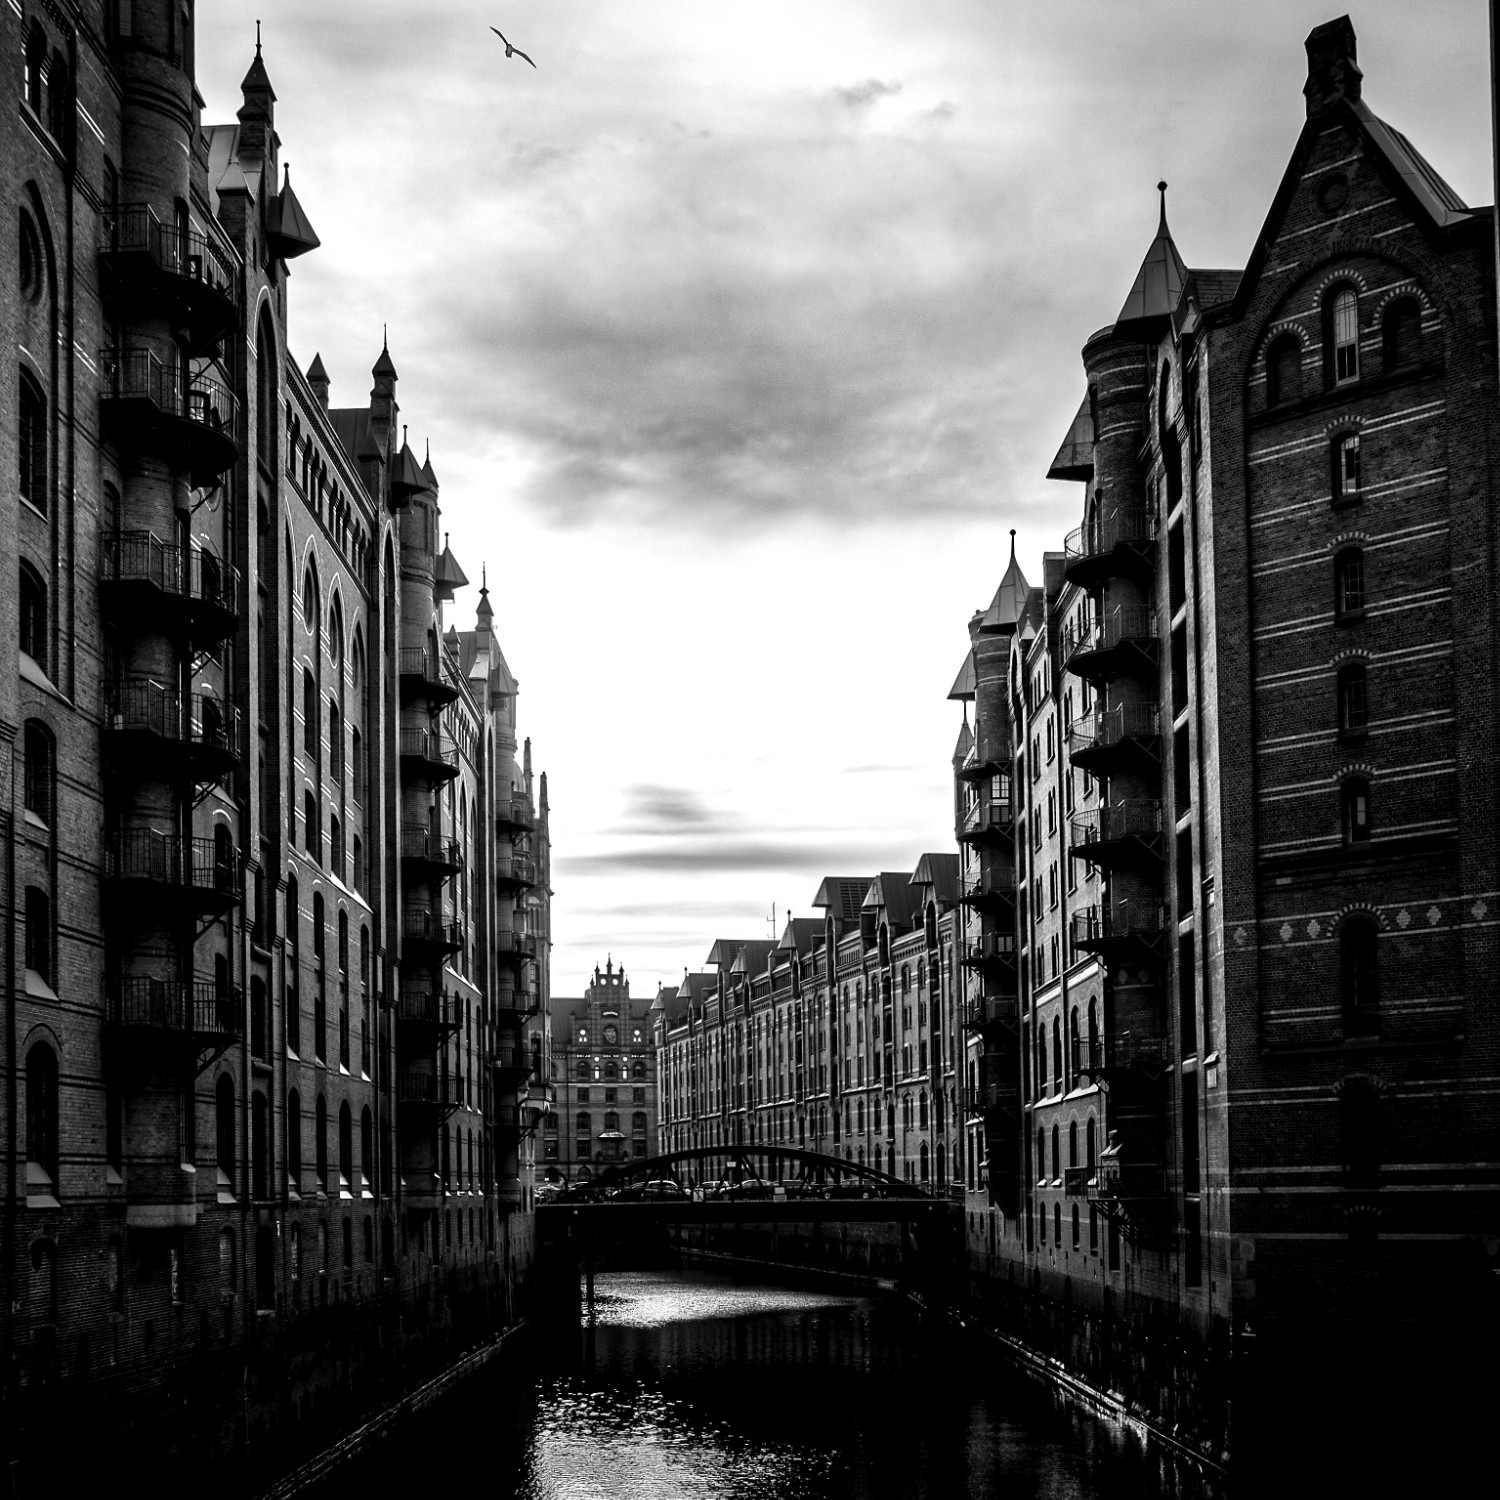 Abroad city grey scale picture